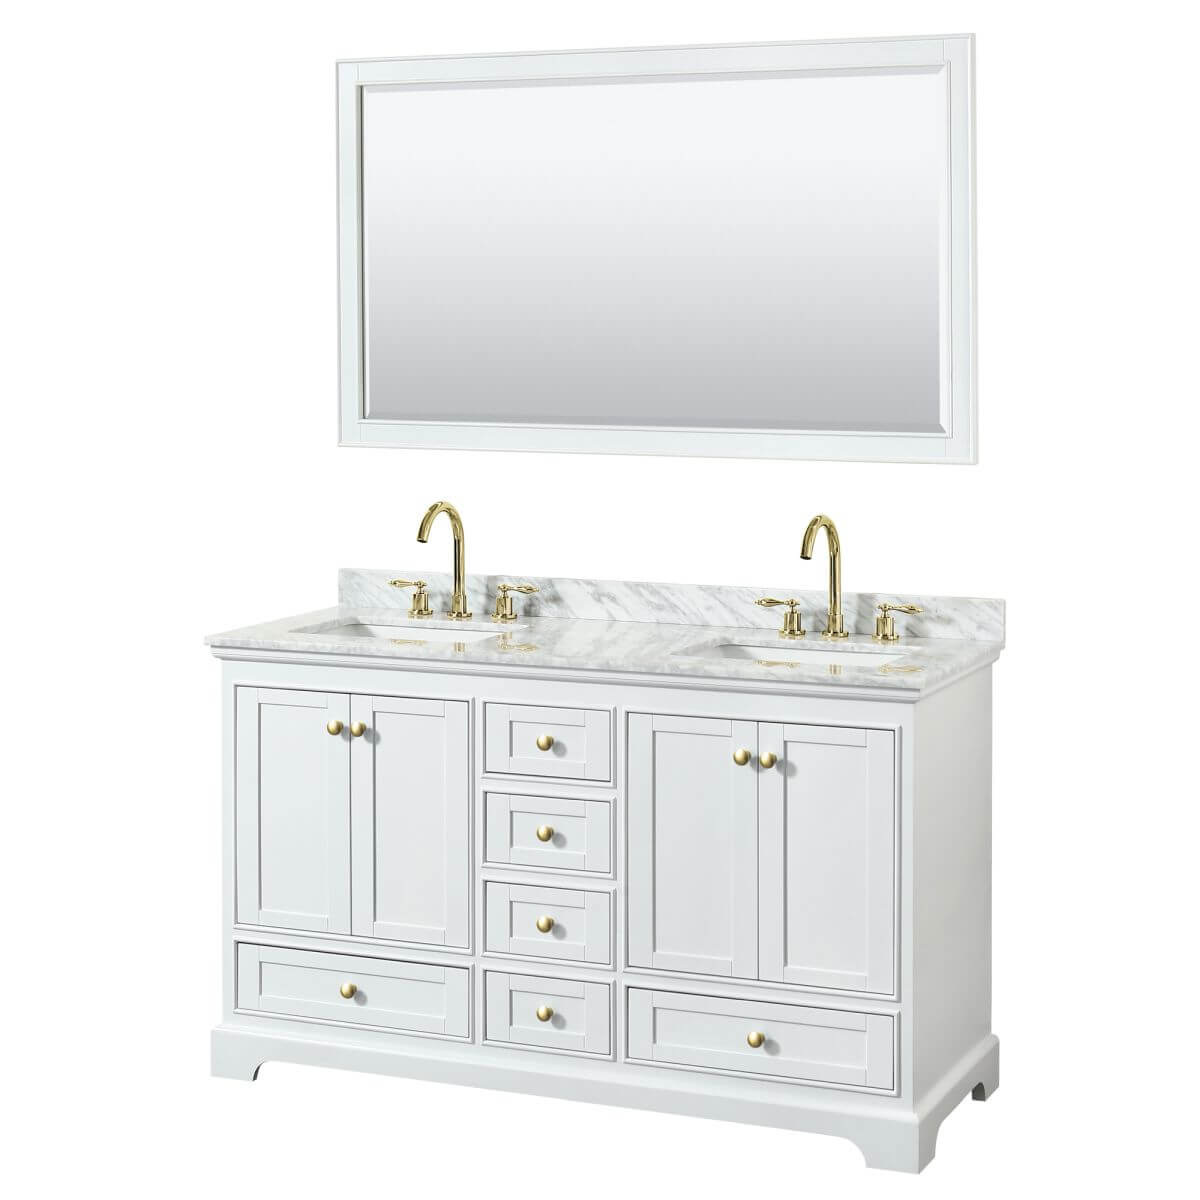 Wyndham Collection Deborah 60 inch Double Bathroom Vanity in White with White Carrara Marble Countertop, Undermount Square Sinks, Brushed Gold Trim and 58 inch Mirror - WCS202060DWGCMUNSM58